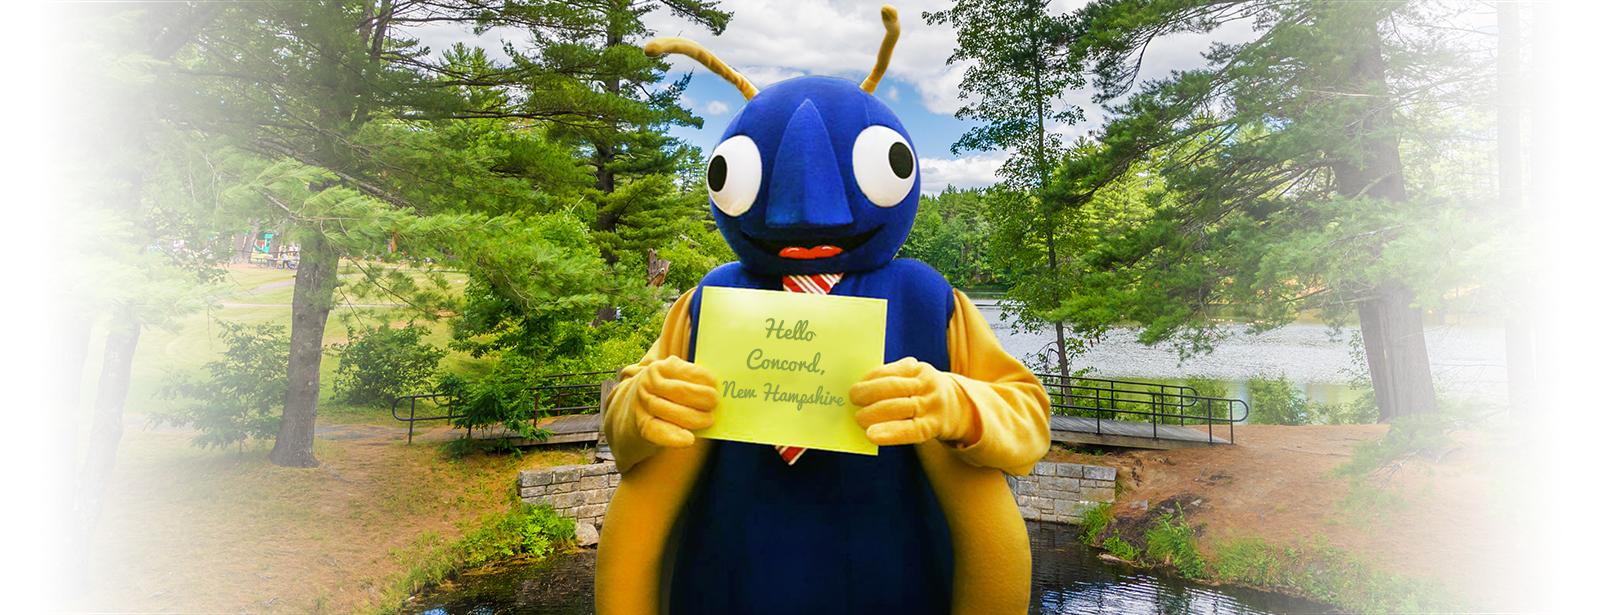 the company mascot holding a concord new hampshire sign